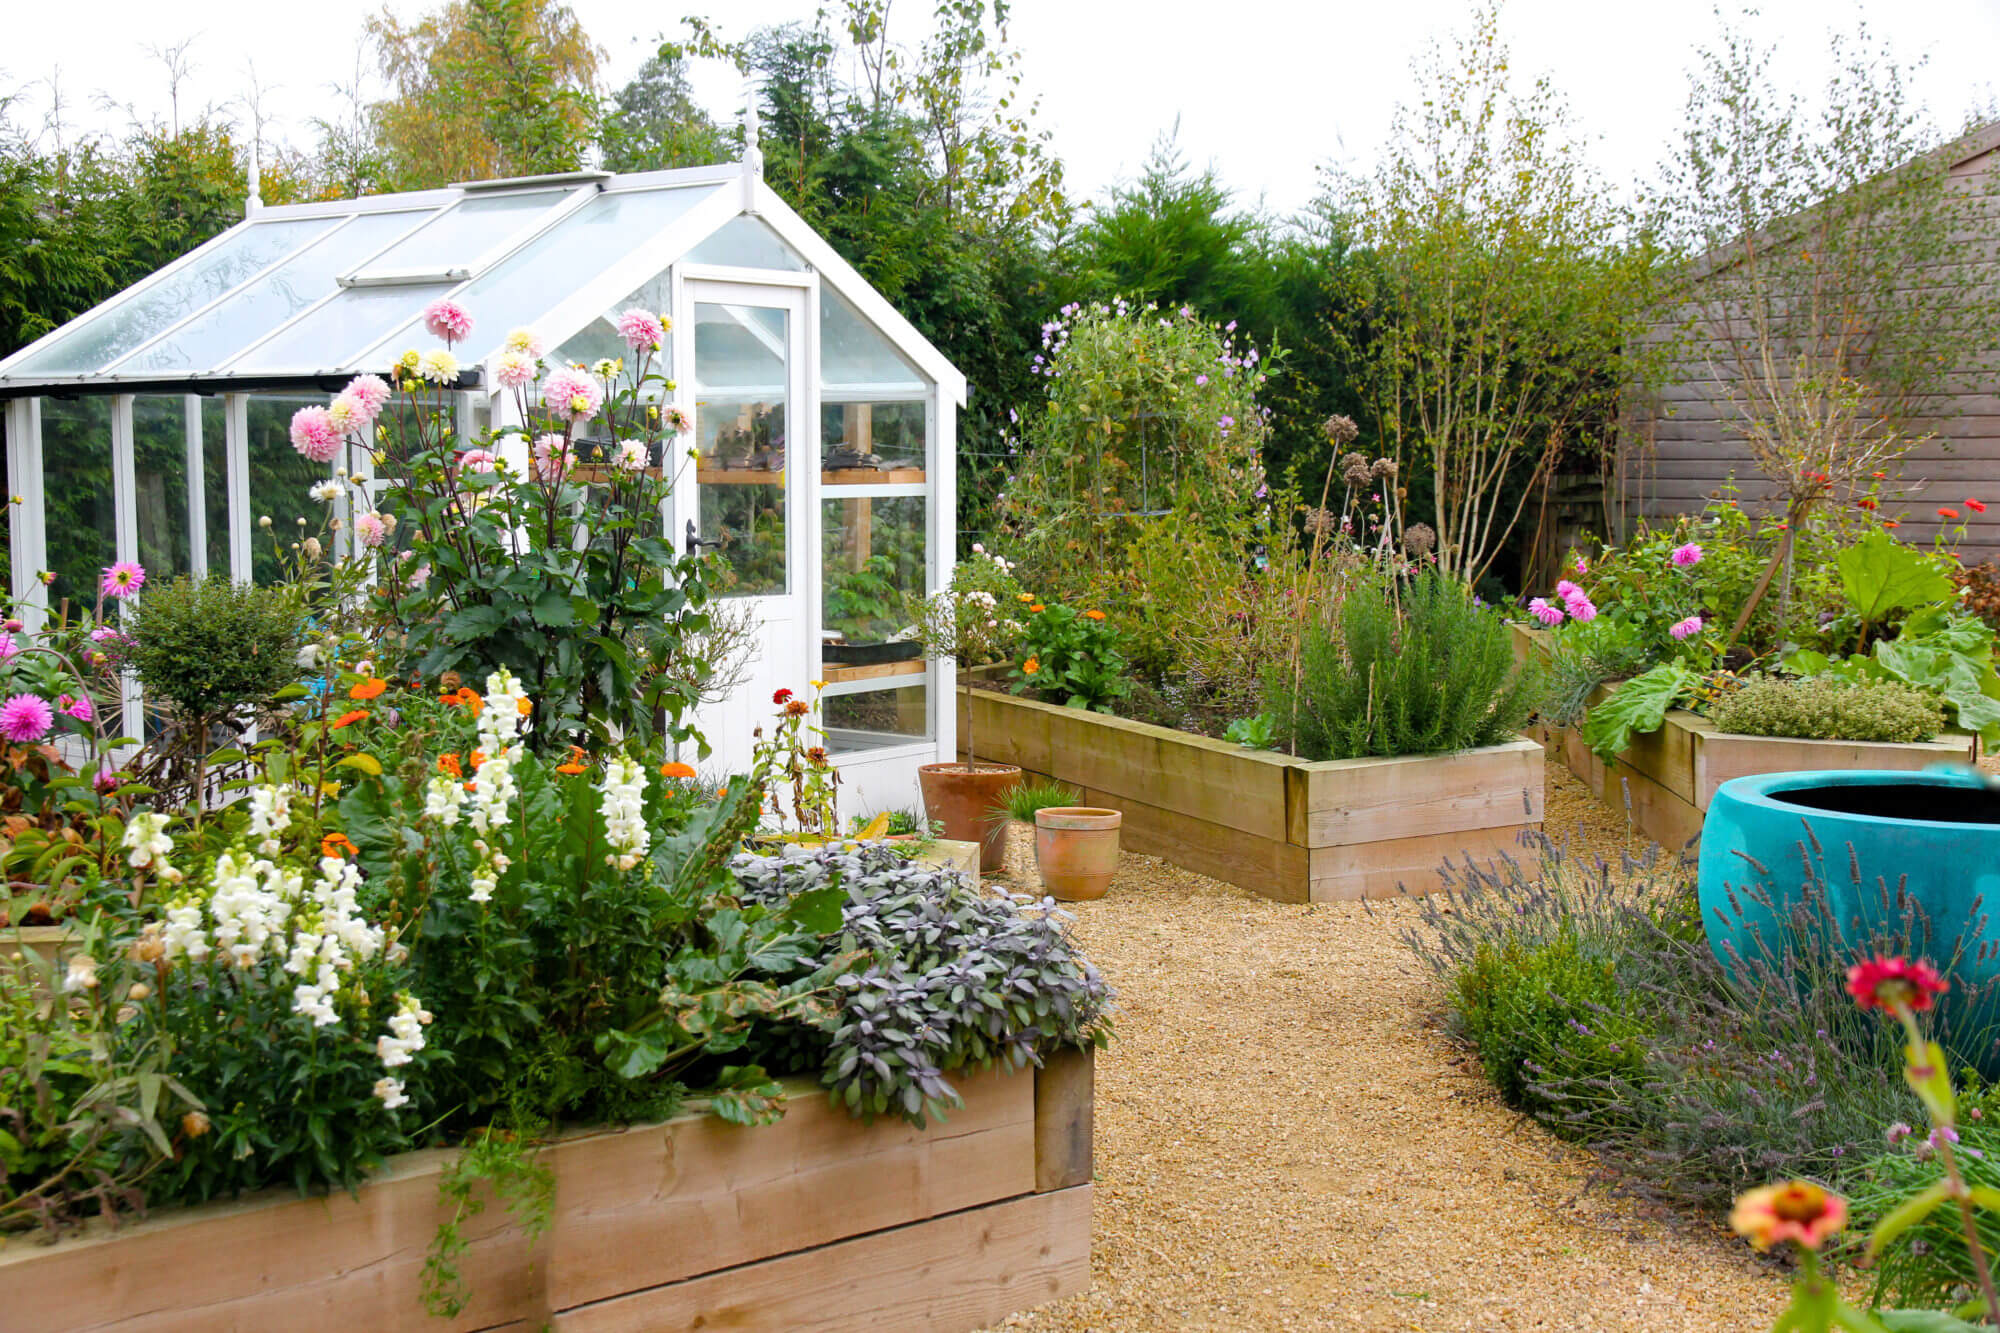 Glass garden potting conservation surrounded by cut flower patches